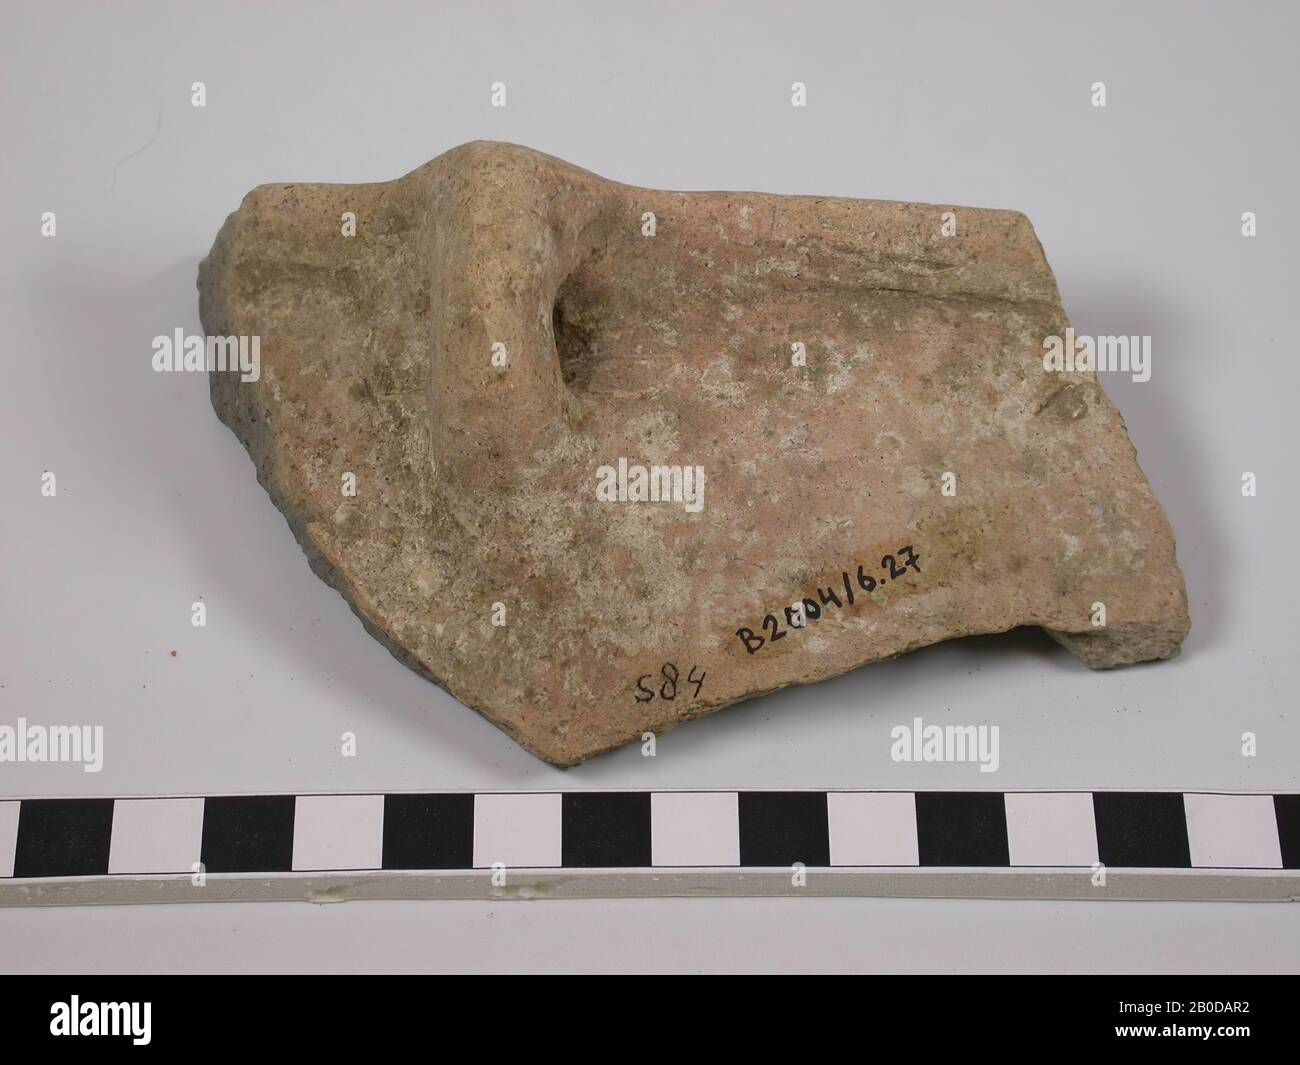 Fragment of the edge and handle of a deep pot. The handle is relatively small in relation to the pot. The cross-section of the edge is a V-shape which produces a trench in the middle of the edge. The wall runs slightly bulging down from the edge. The color of the exterior is predominantly light red with many white spots. The inside is buff and dark gray on the edges., Tableware, earthenware, L 11.8 cm, W 6.9 cm, Roman Period 63 BC. - 324 AD, Palestine Stock Photo